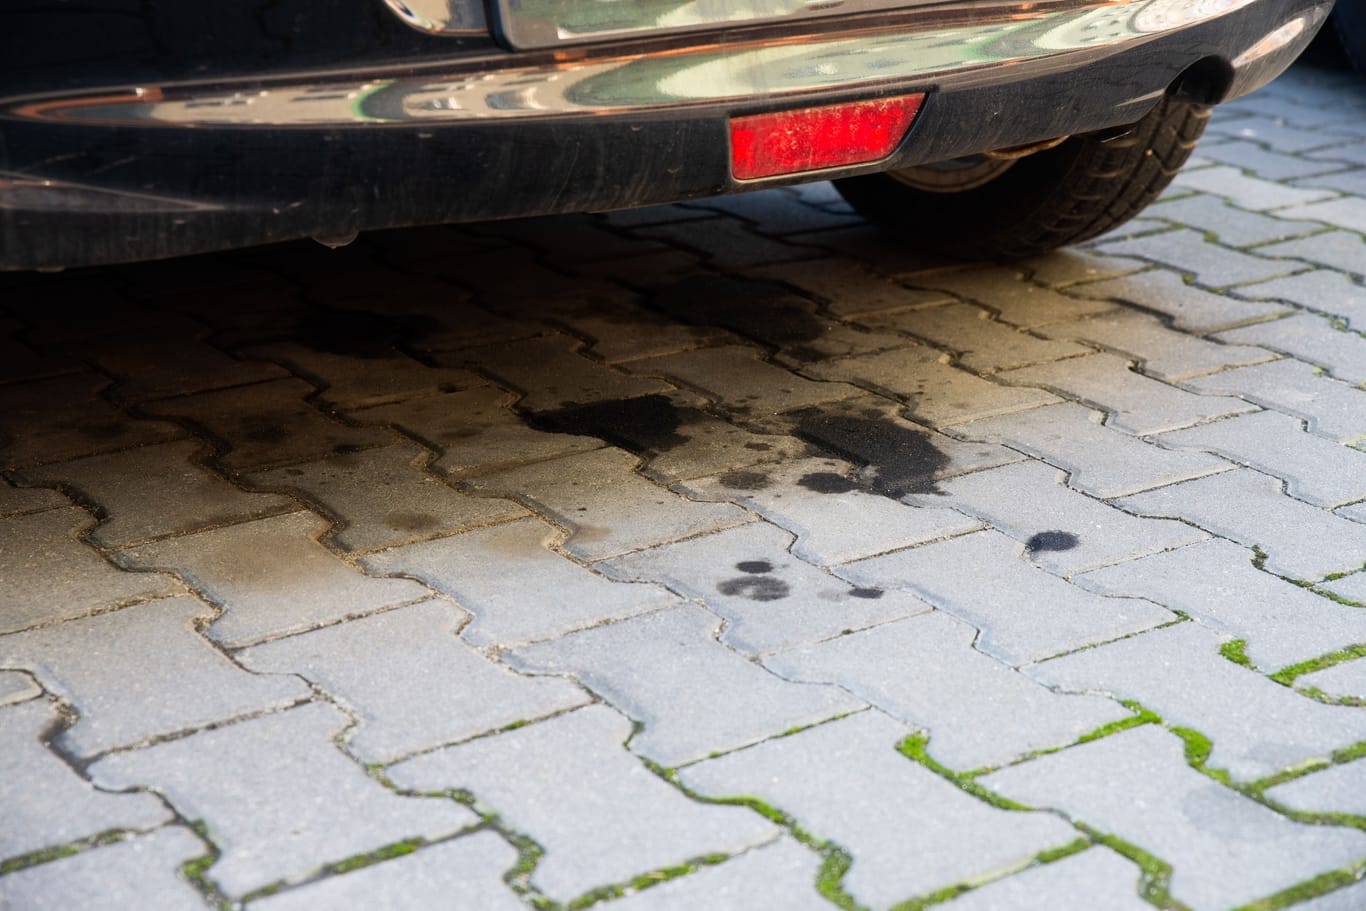 oil leaking from an old car